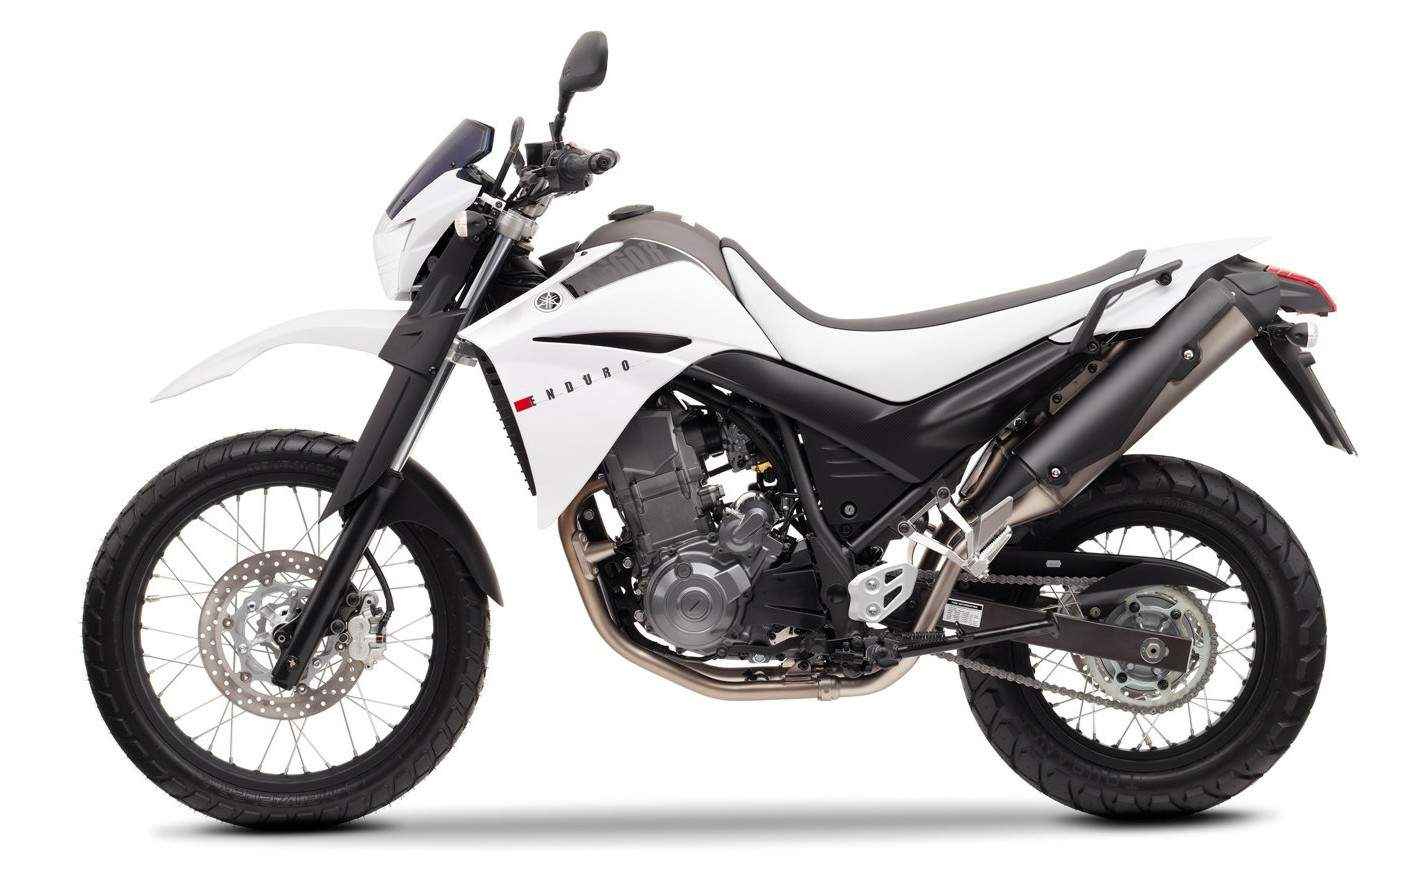 Yamaha XT660R Specs Image and Pricing